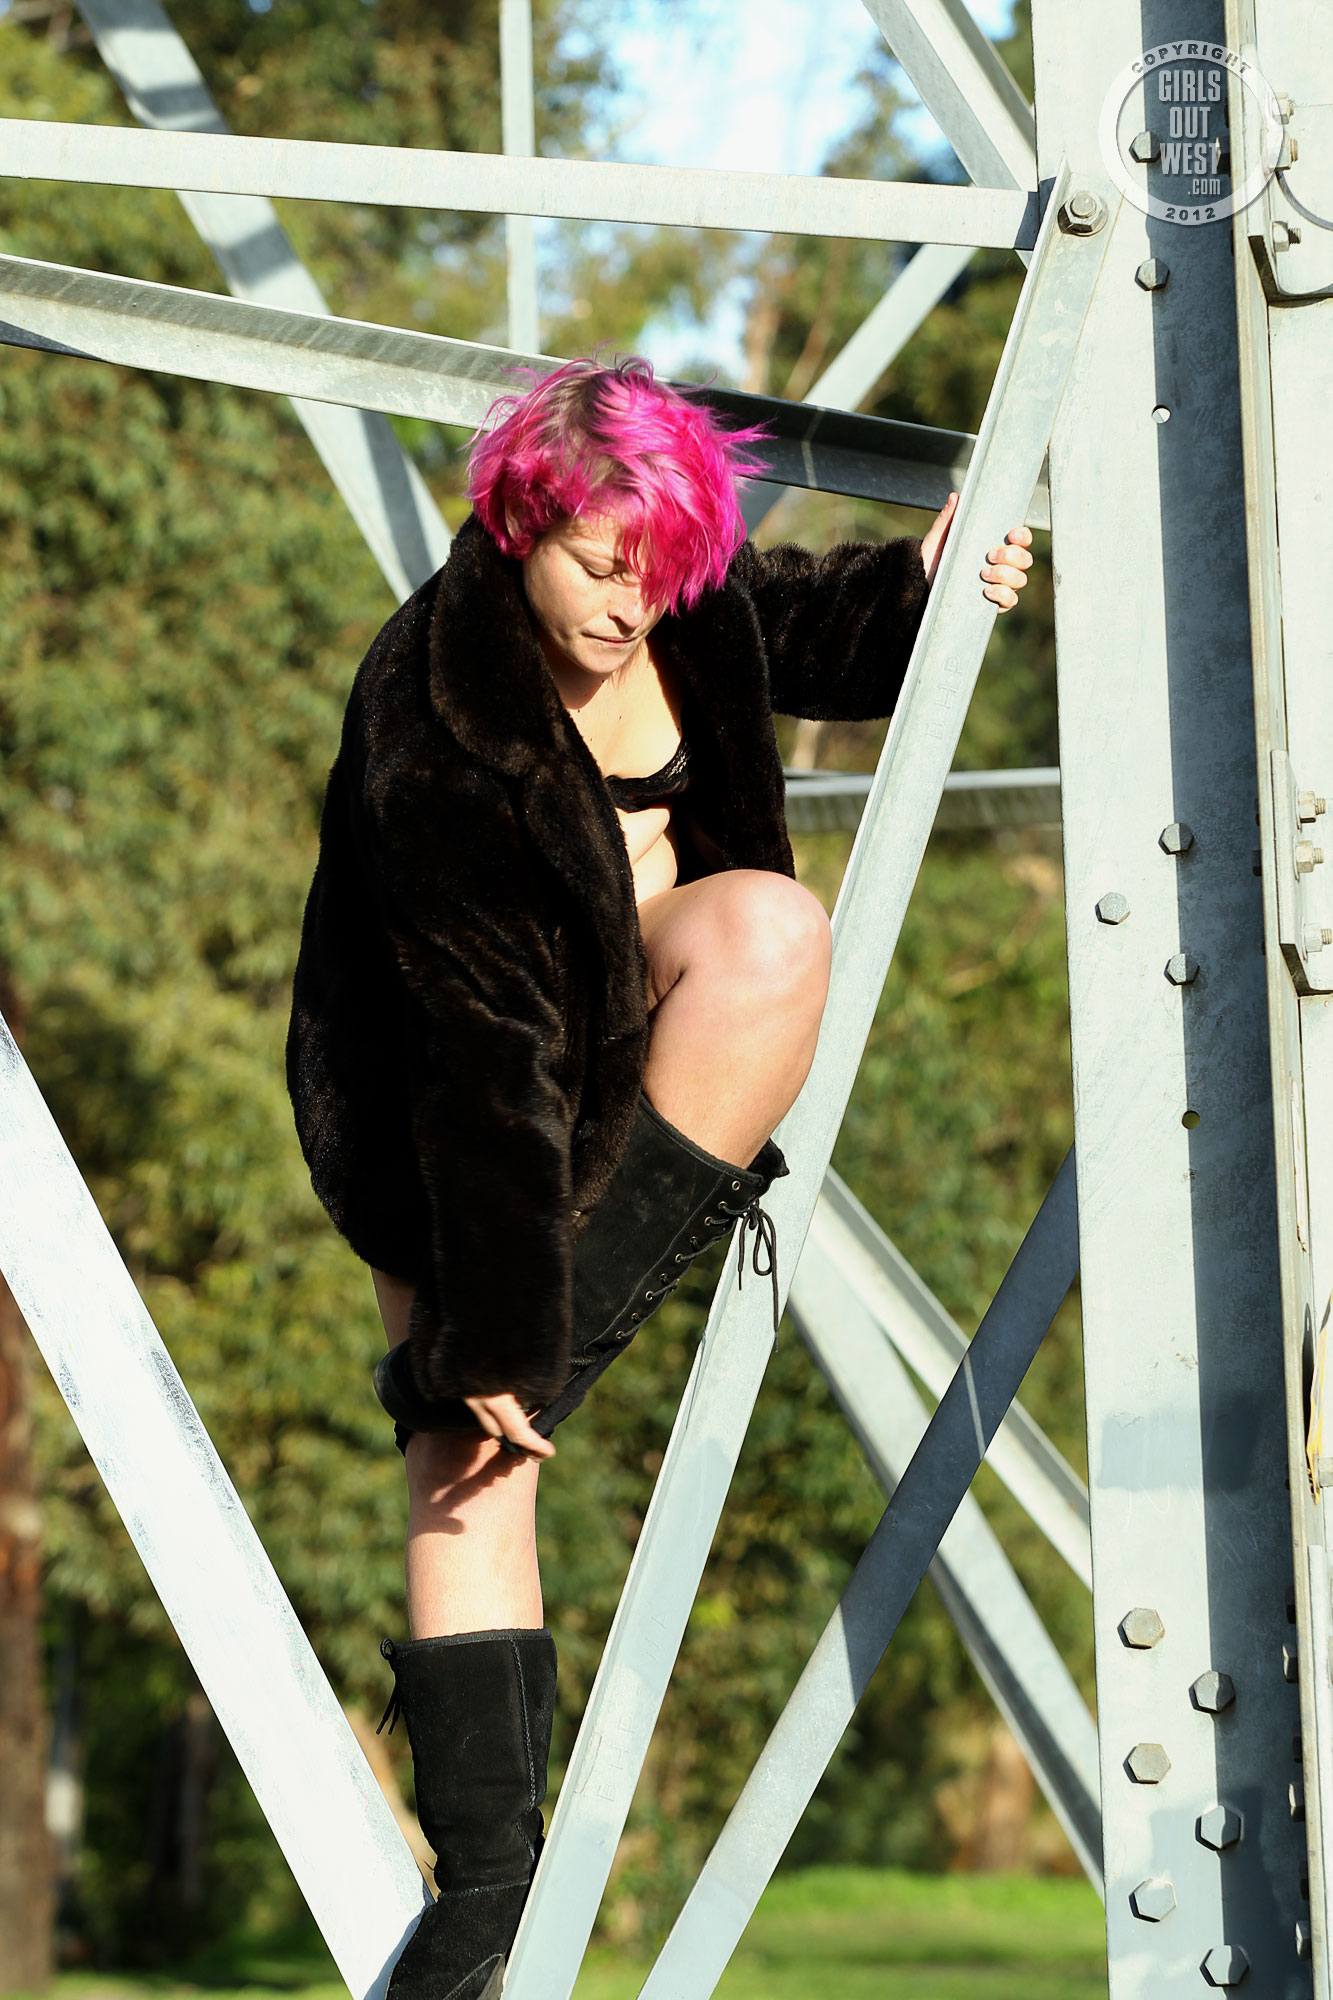 wpid-pink-haired-amateur-franky-flashing-her-pussy-outside-in-her-boots-and-coat6.jpg